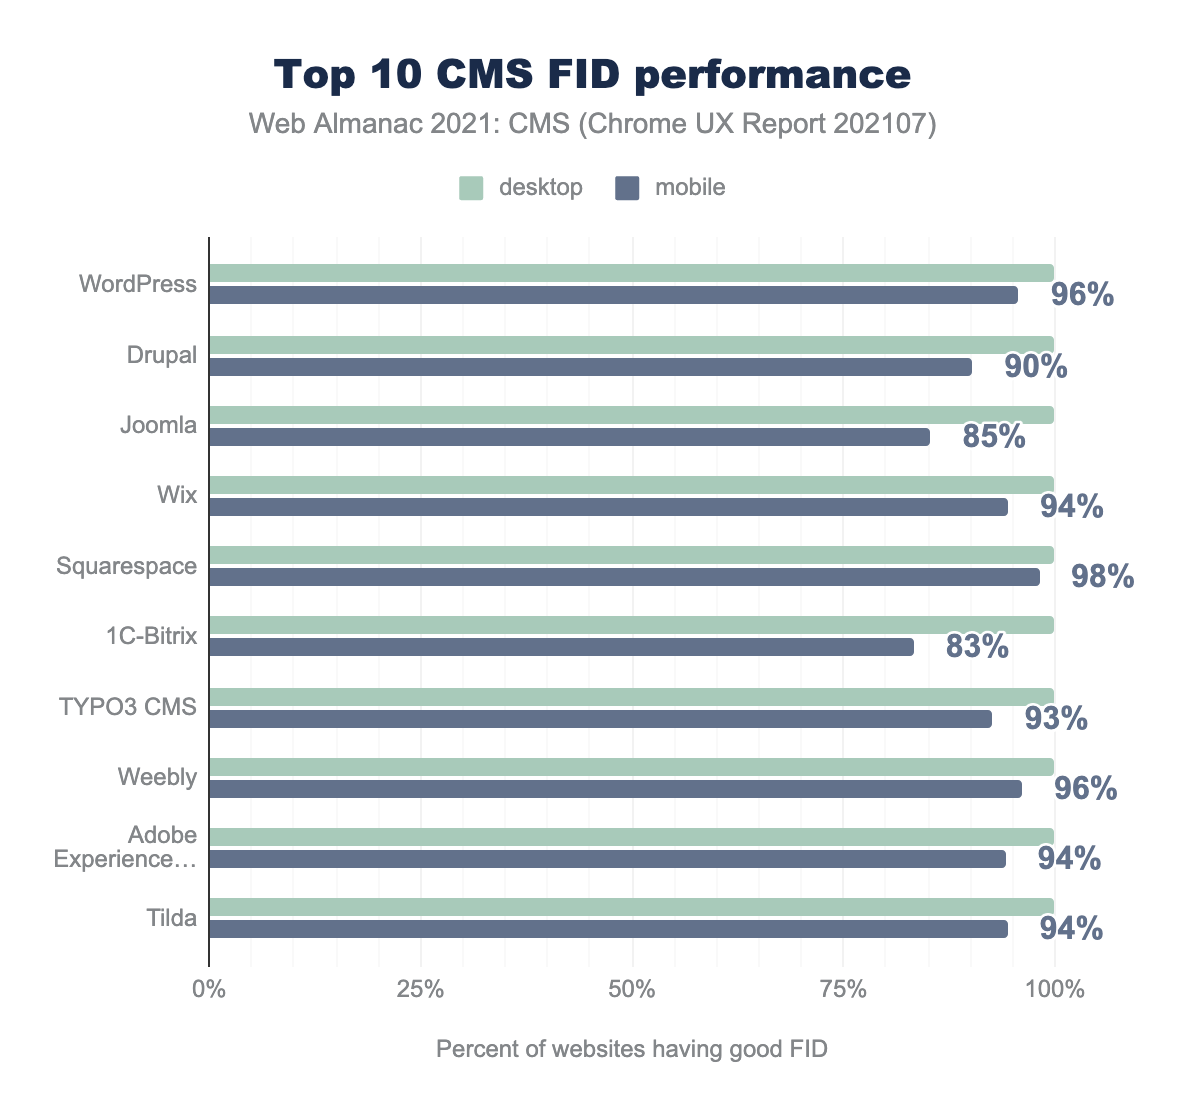 Top 10 CMSs FID performance.